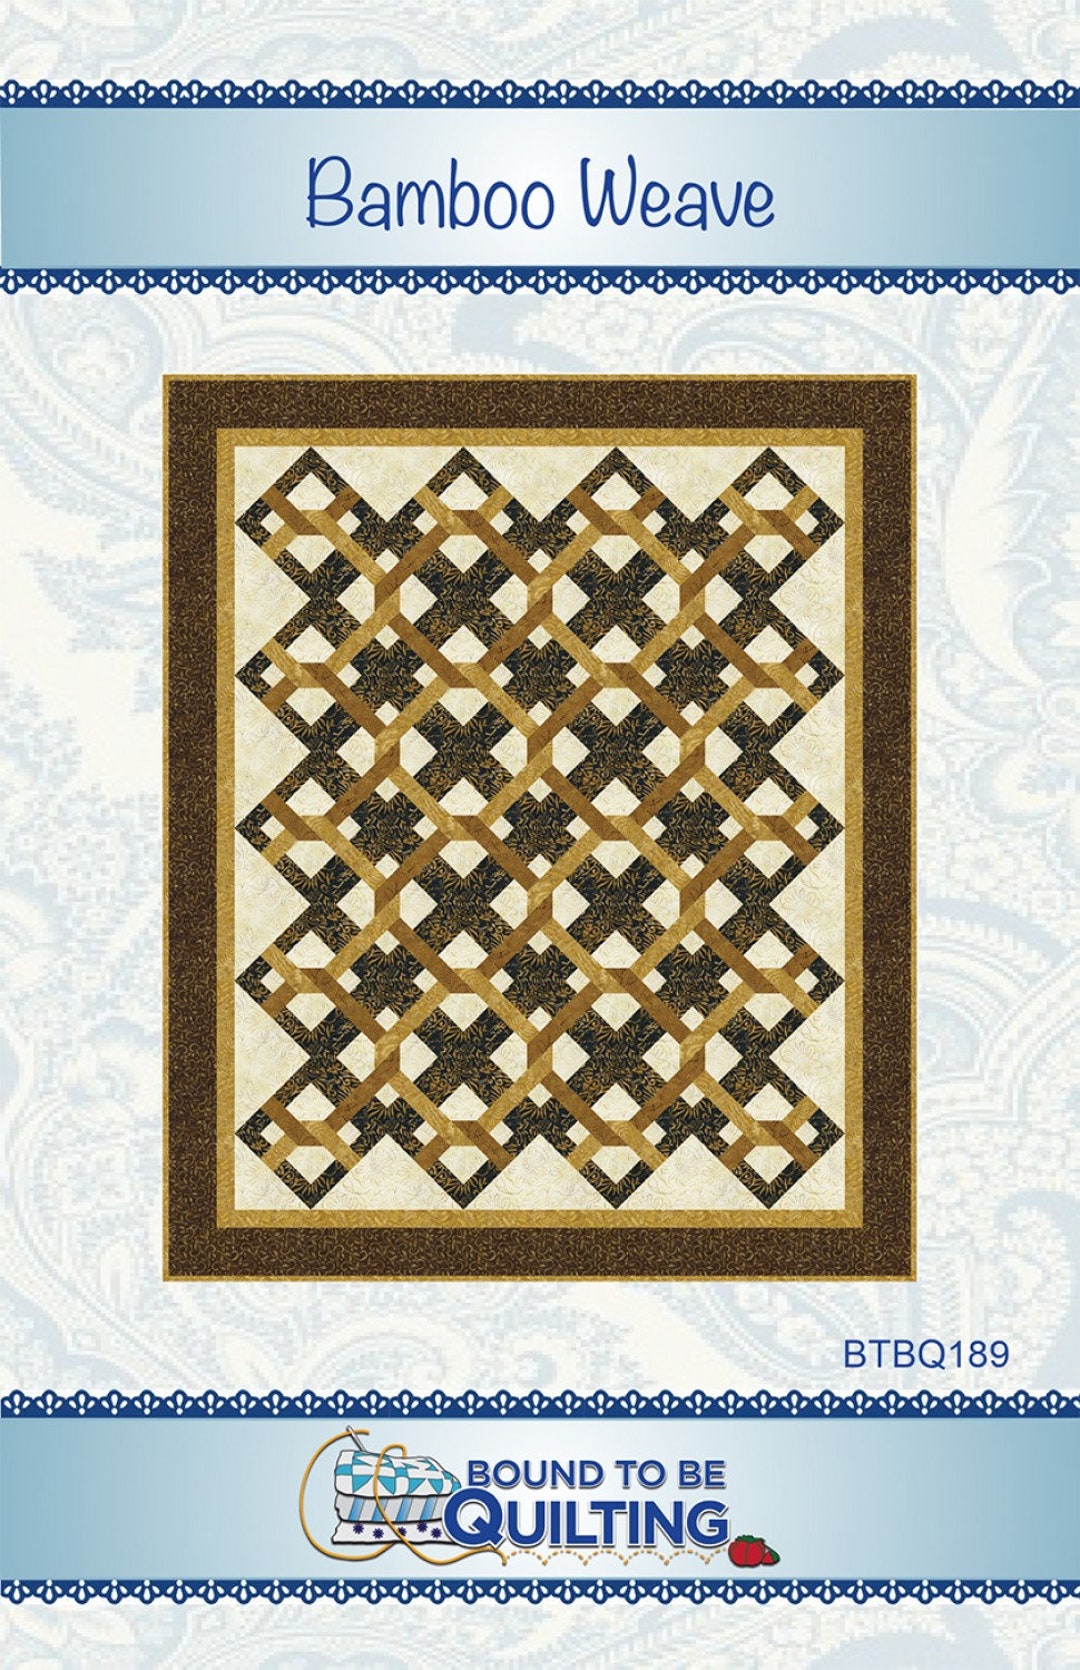 SALE Bamboo Weave Quilt Pattern by Bound to Be Quilting - Etsy